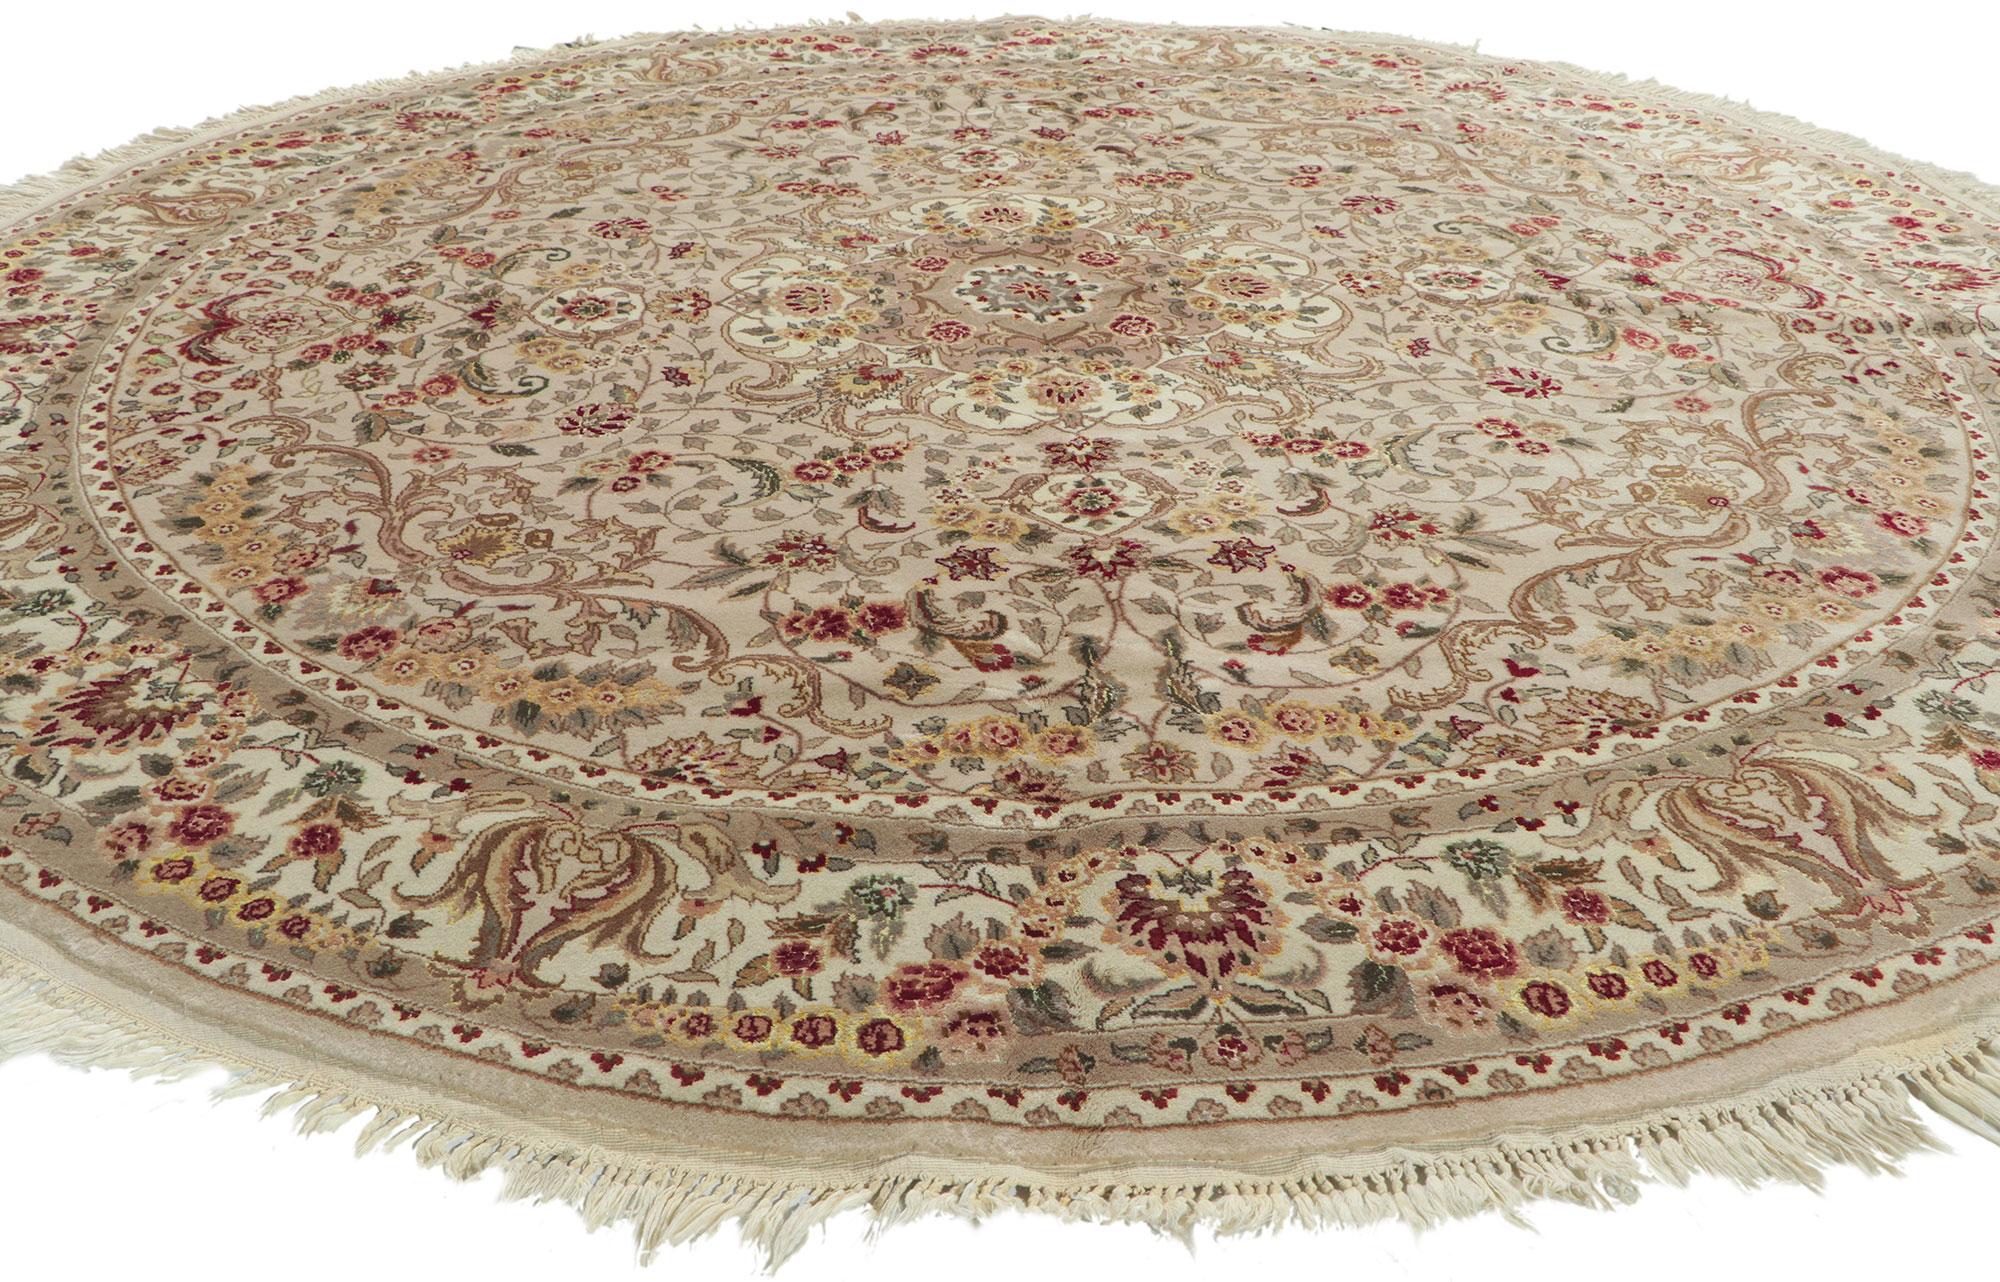 74981 Vintage Persian Style Round Area Rug with Tabriz Design 08'02 X 08'02. 

Adorn your floors with the inspired patterns of Persian weavers of Tabriz. Round and versatile, this hand-knotted wool and silk vintage Persian style round rug represents